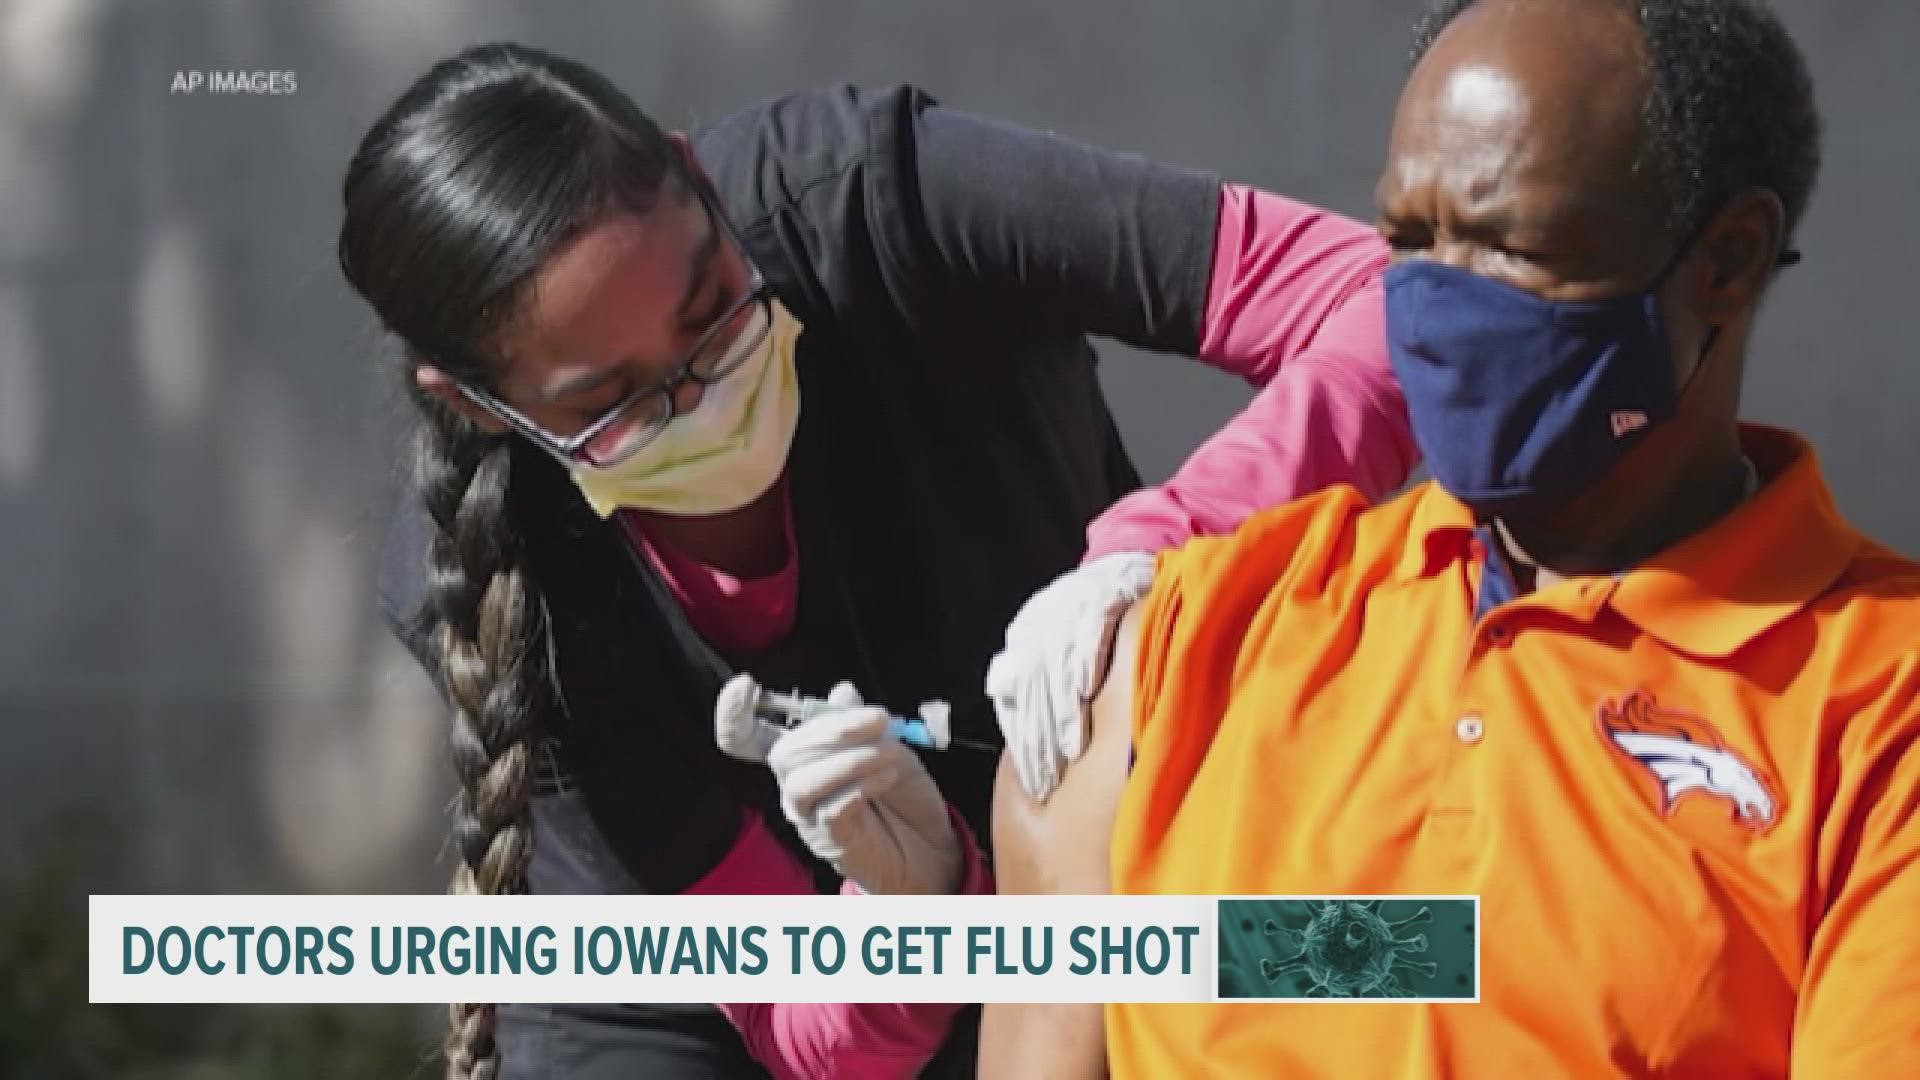 Flu season typically starts in October and ends in May according to the Centers for Disease Control and Prevention.